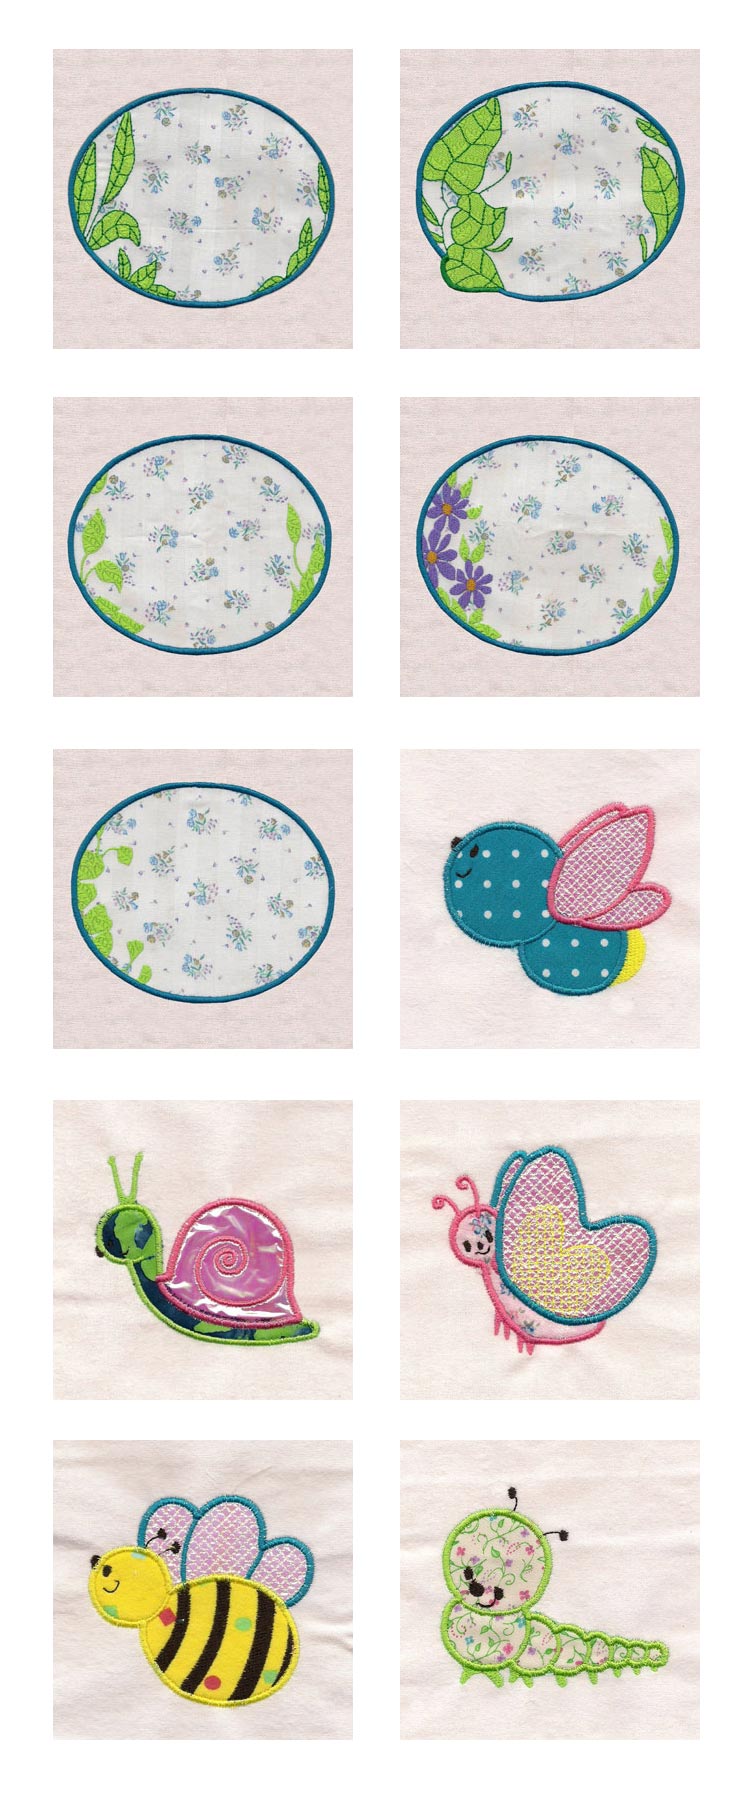 Spring Time Scenes 2 Embroidery Machine Design Details